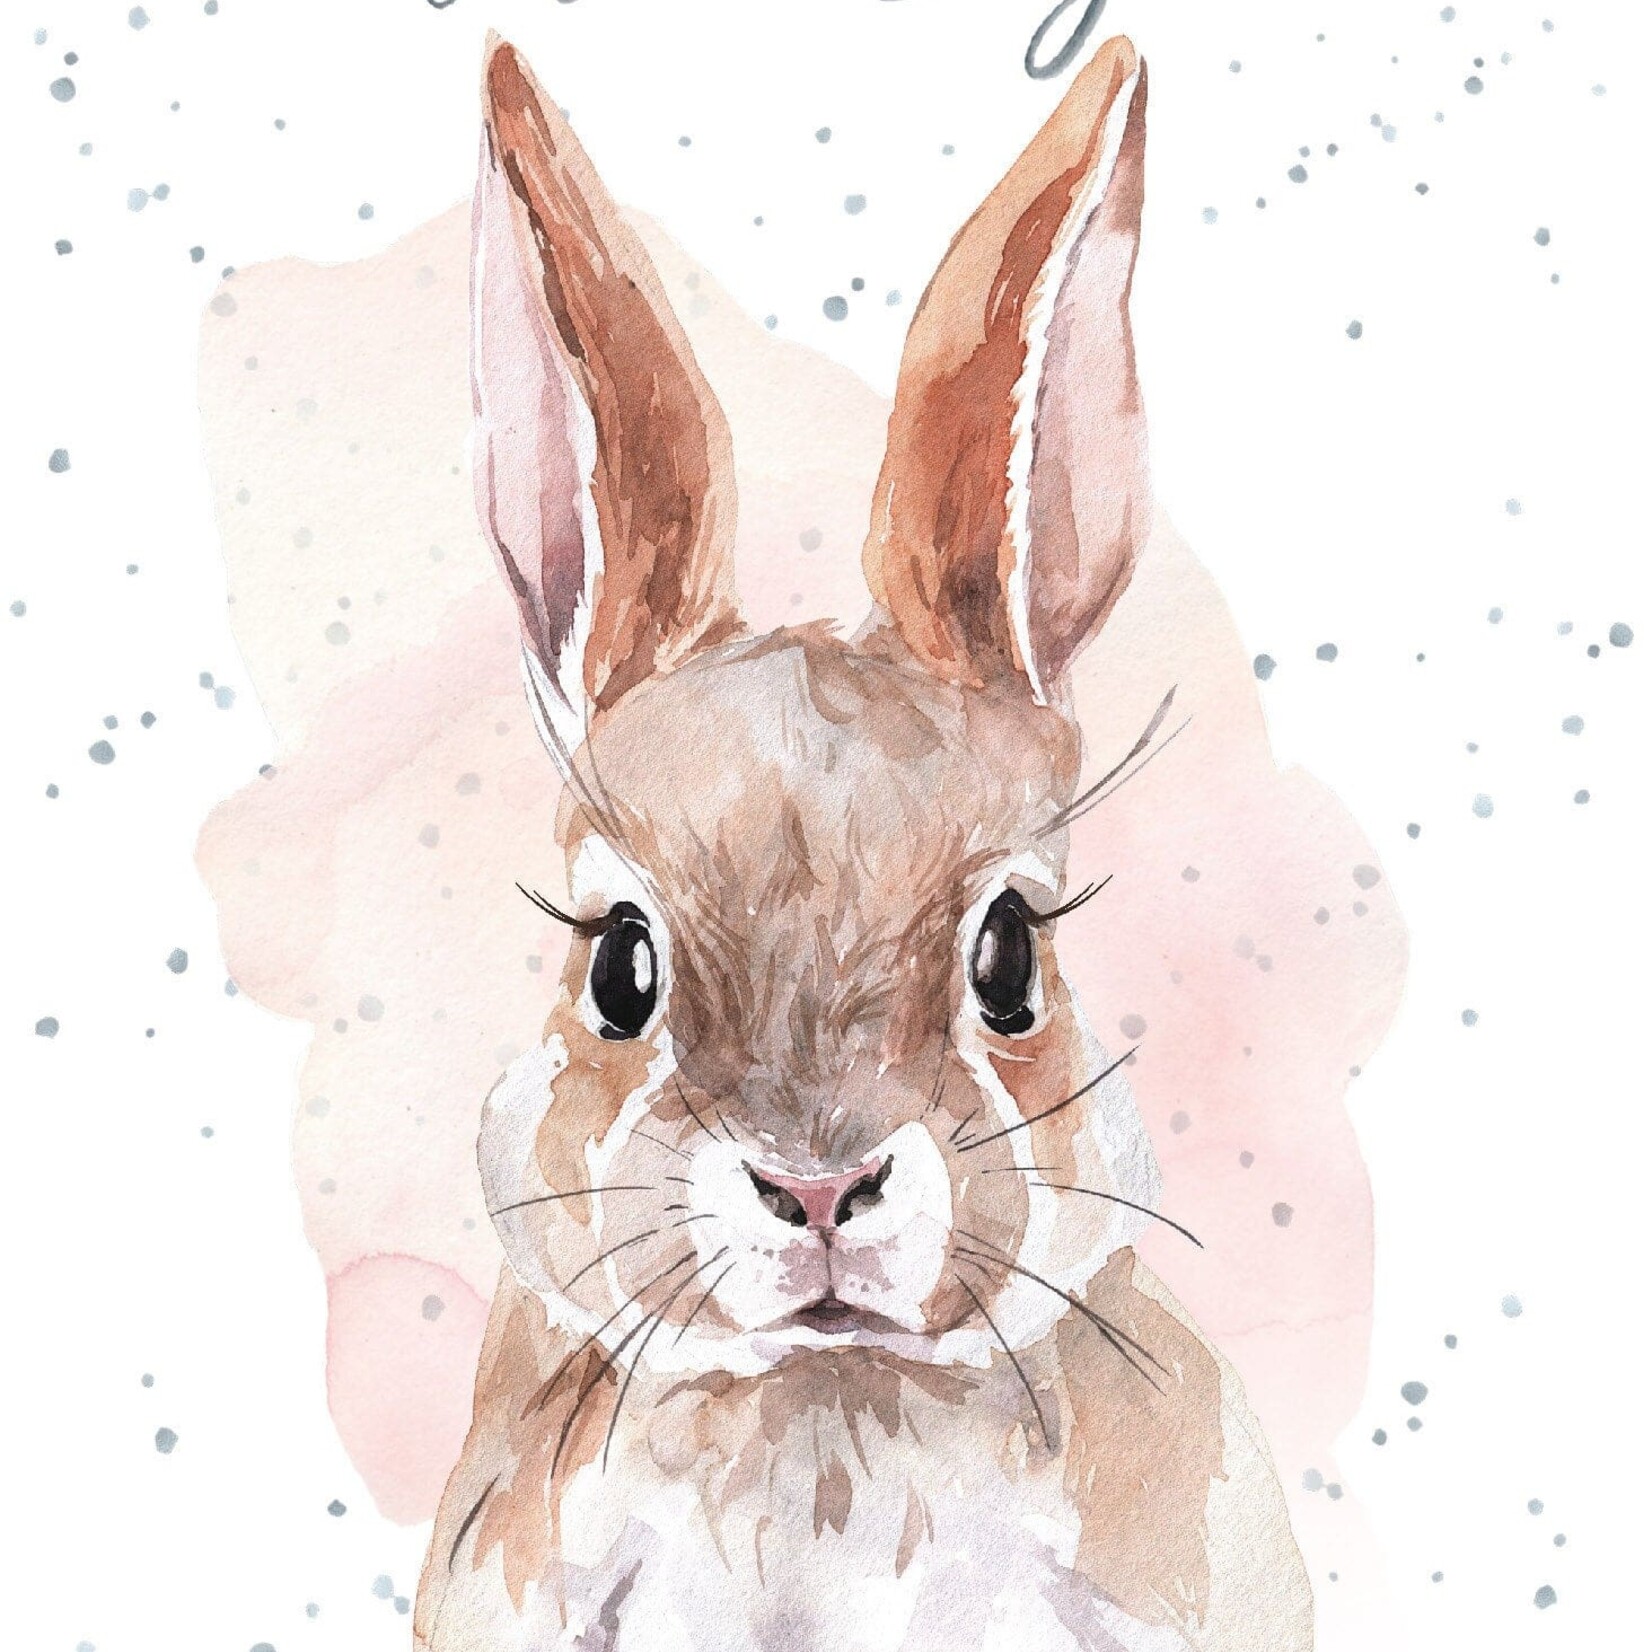 Some bunny thinking of you - Greeting Card